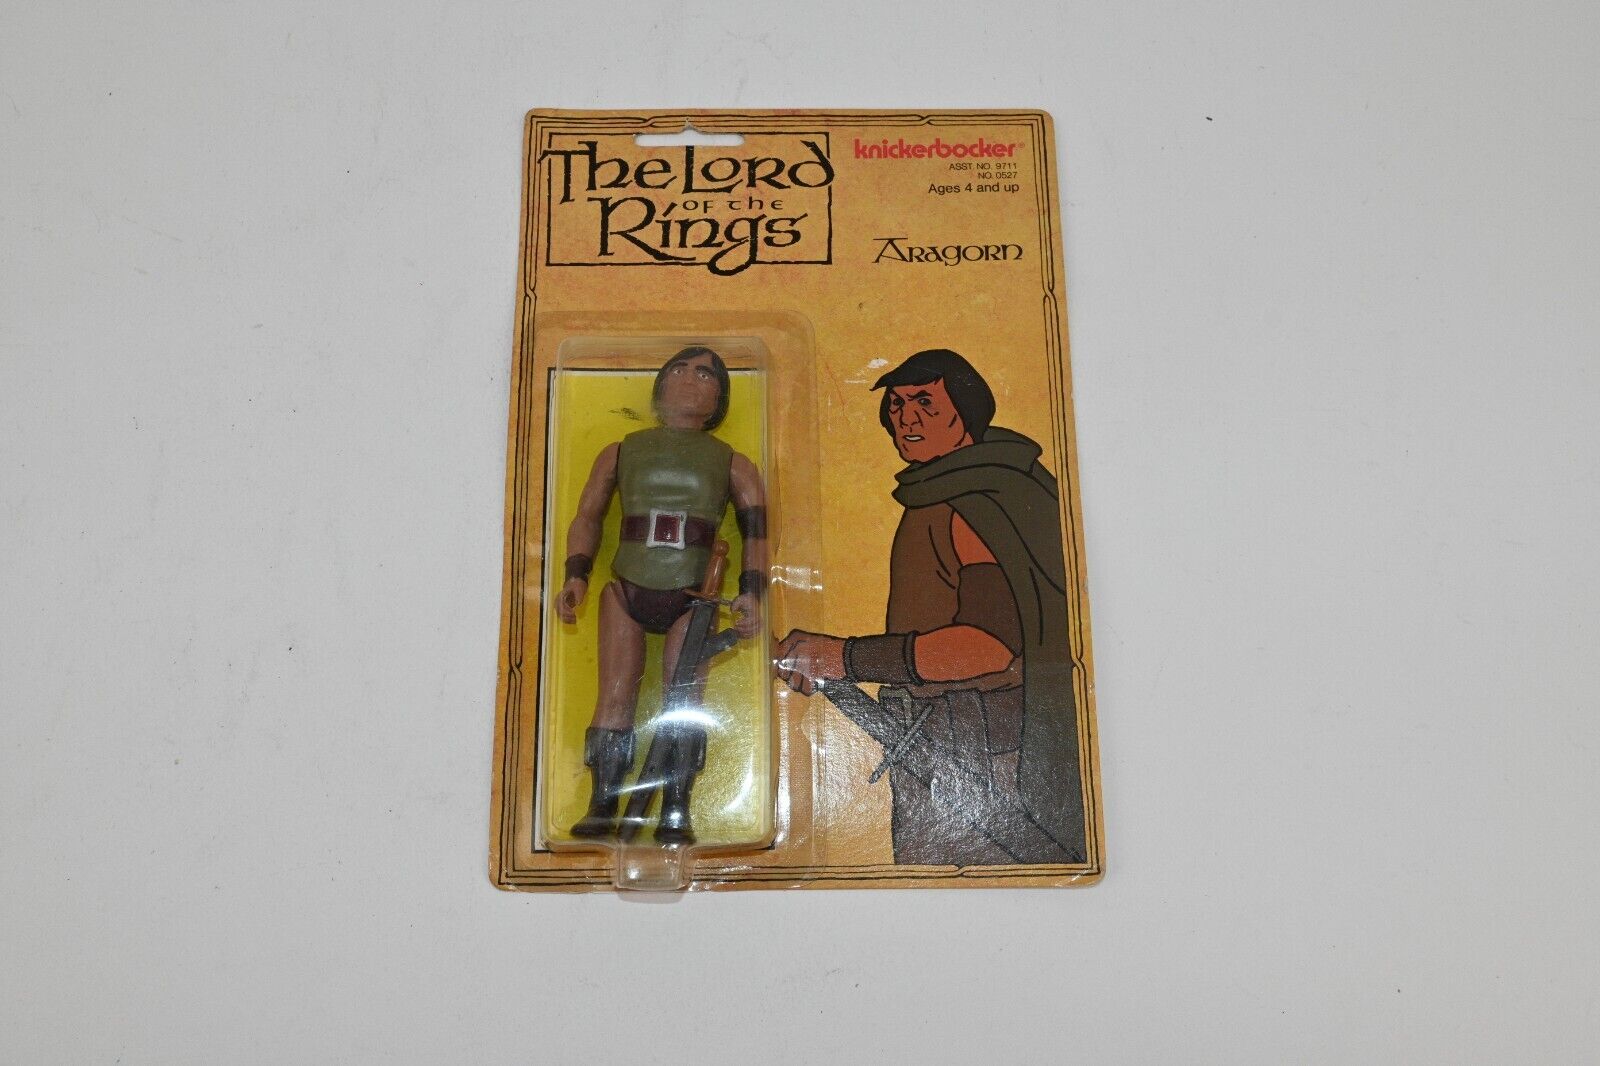 Vintage The Lord of the Rings Aragorn Knickerbocker 1979